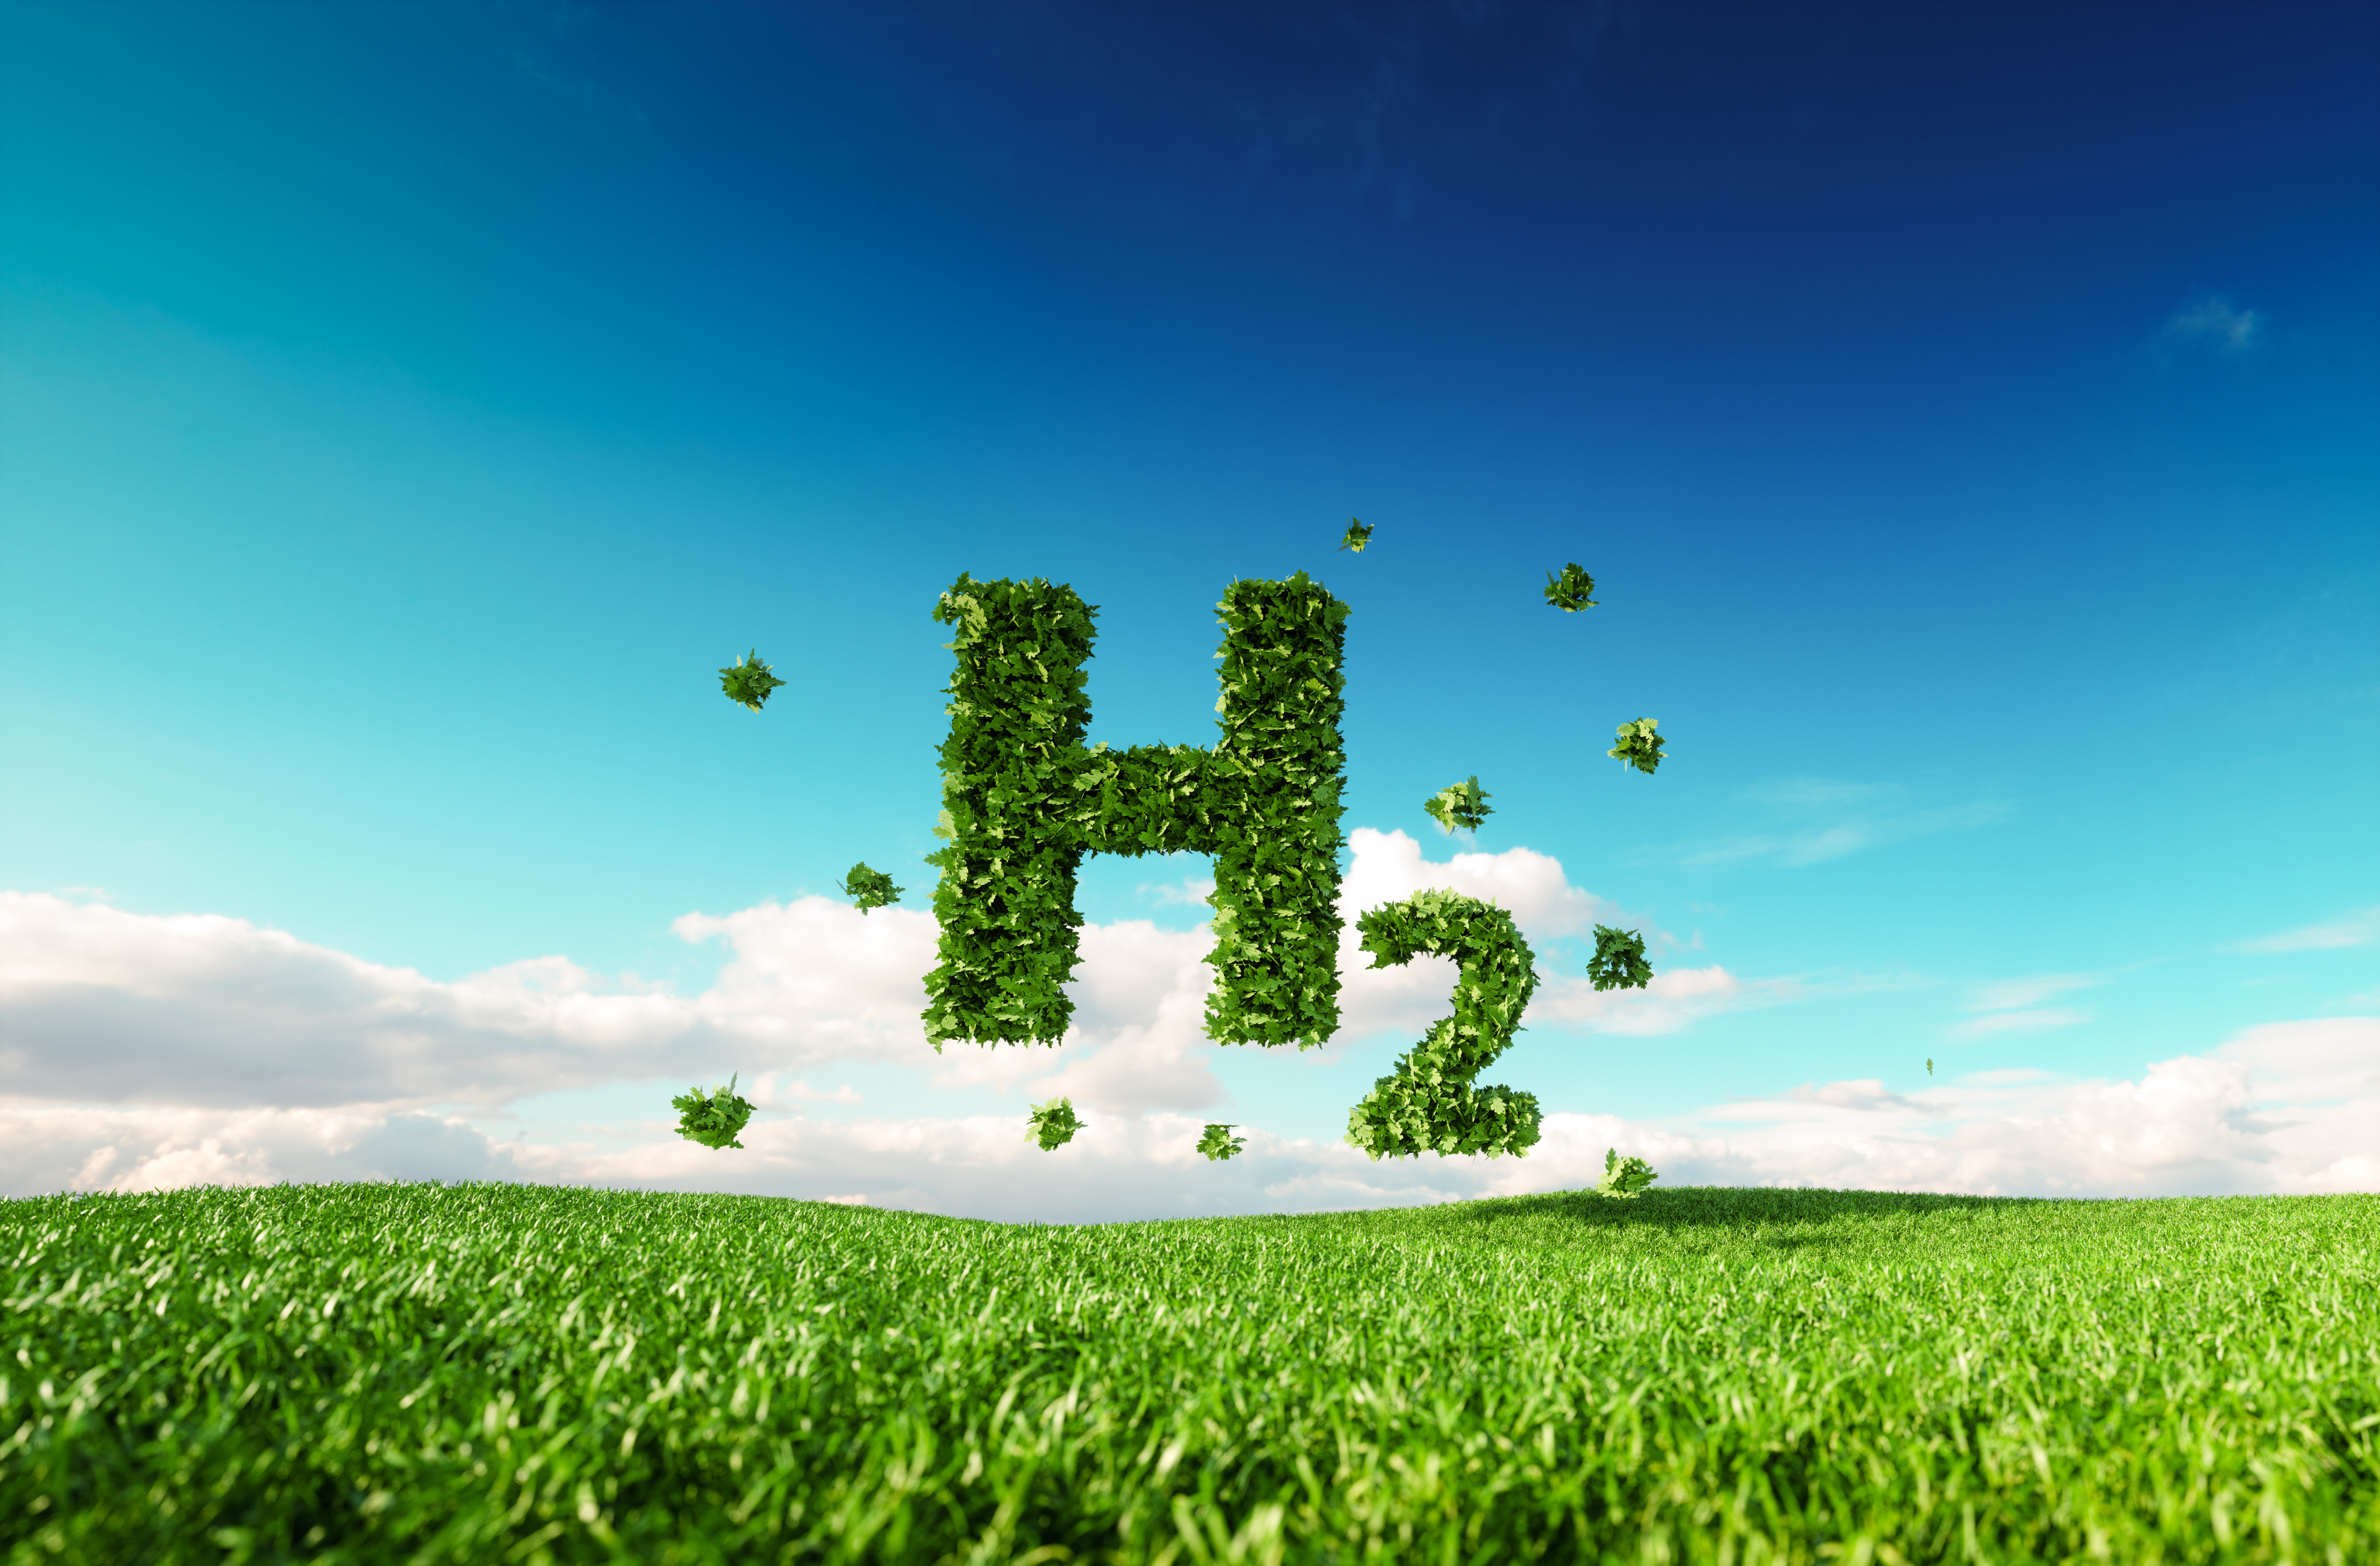 Most hydrogen is currently made using fossil fuels like coal or natural gas. Photo: Shutterstock